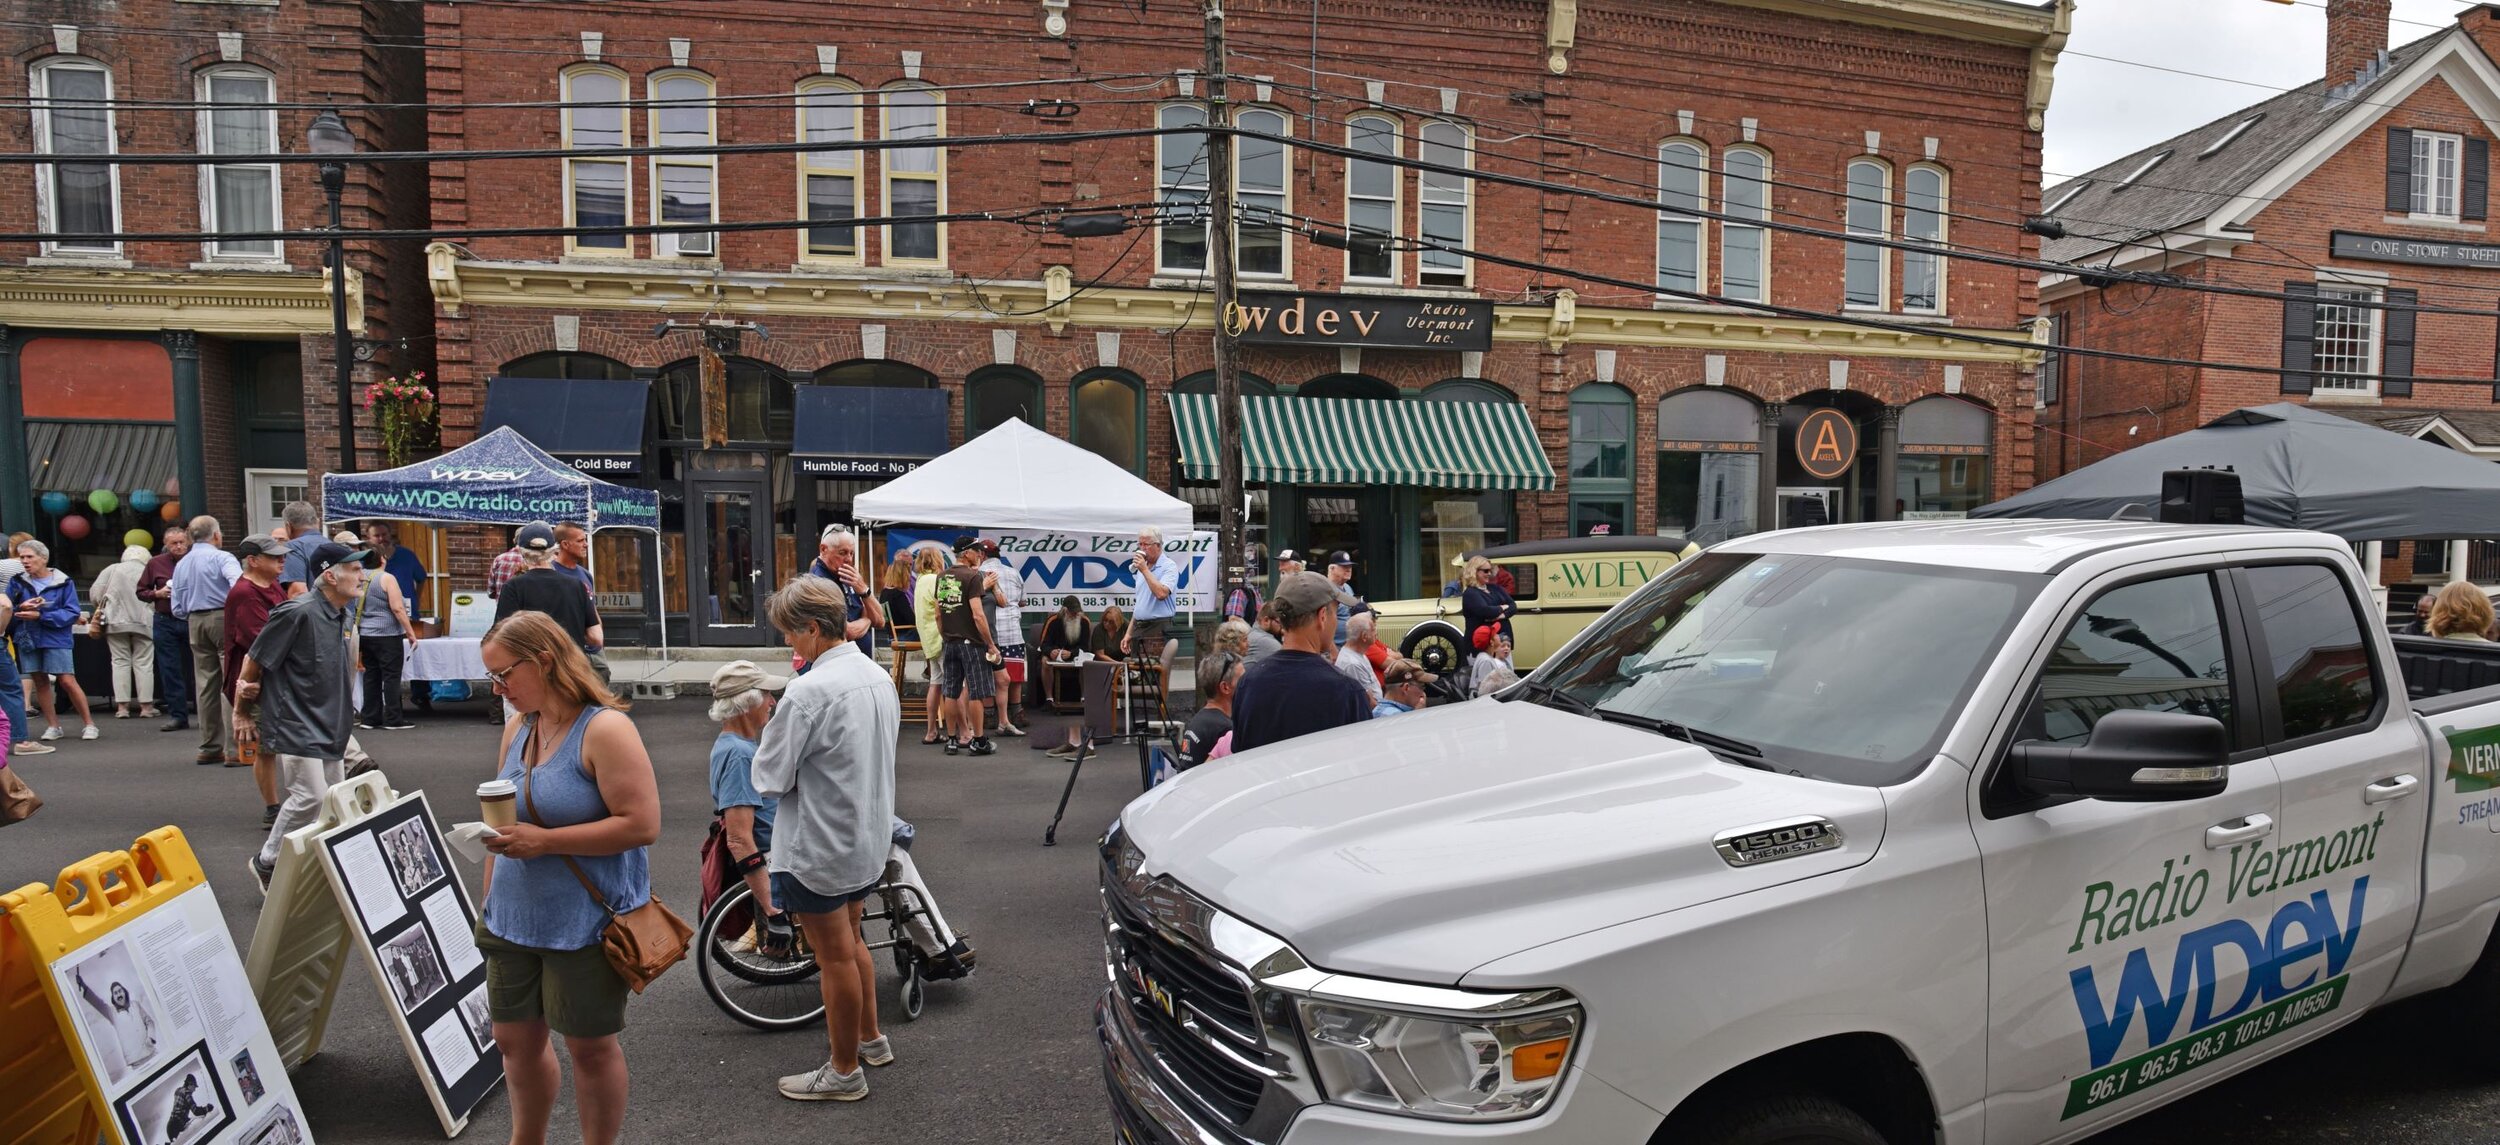   Lower Stowe Street is closed off for WDEV's 90th anniversary block party on Saturday, June 17. Audience members filled a seating area and milled about to check out exhibits with stories from the station's history along with free music CDs and video